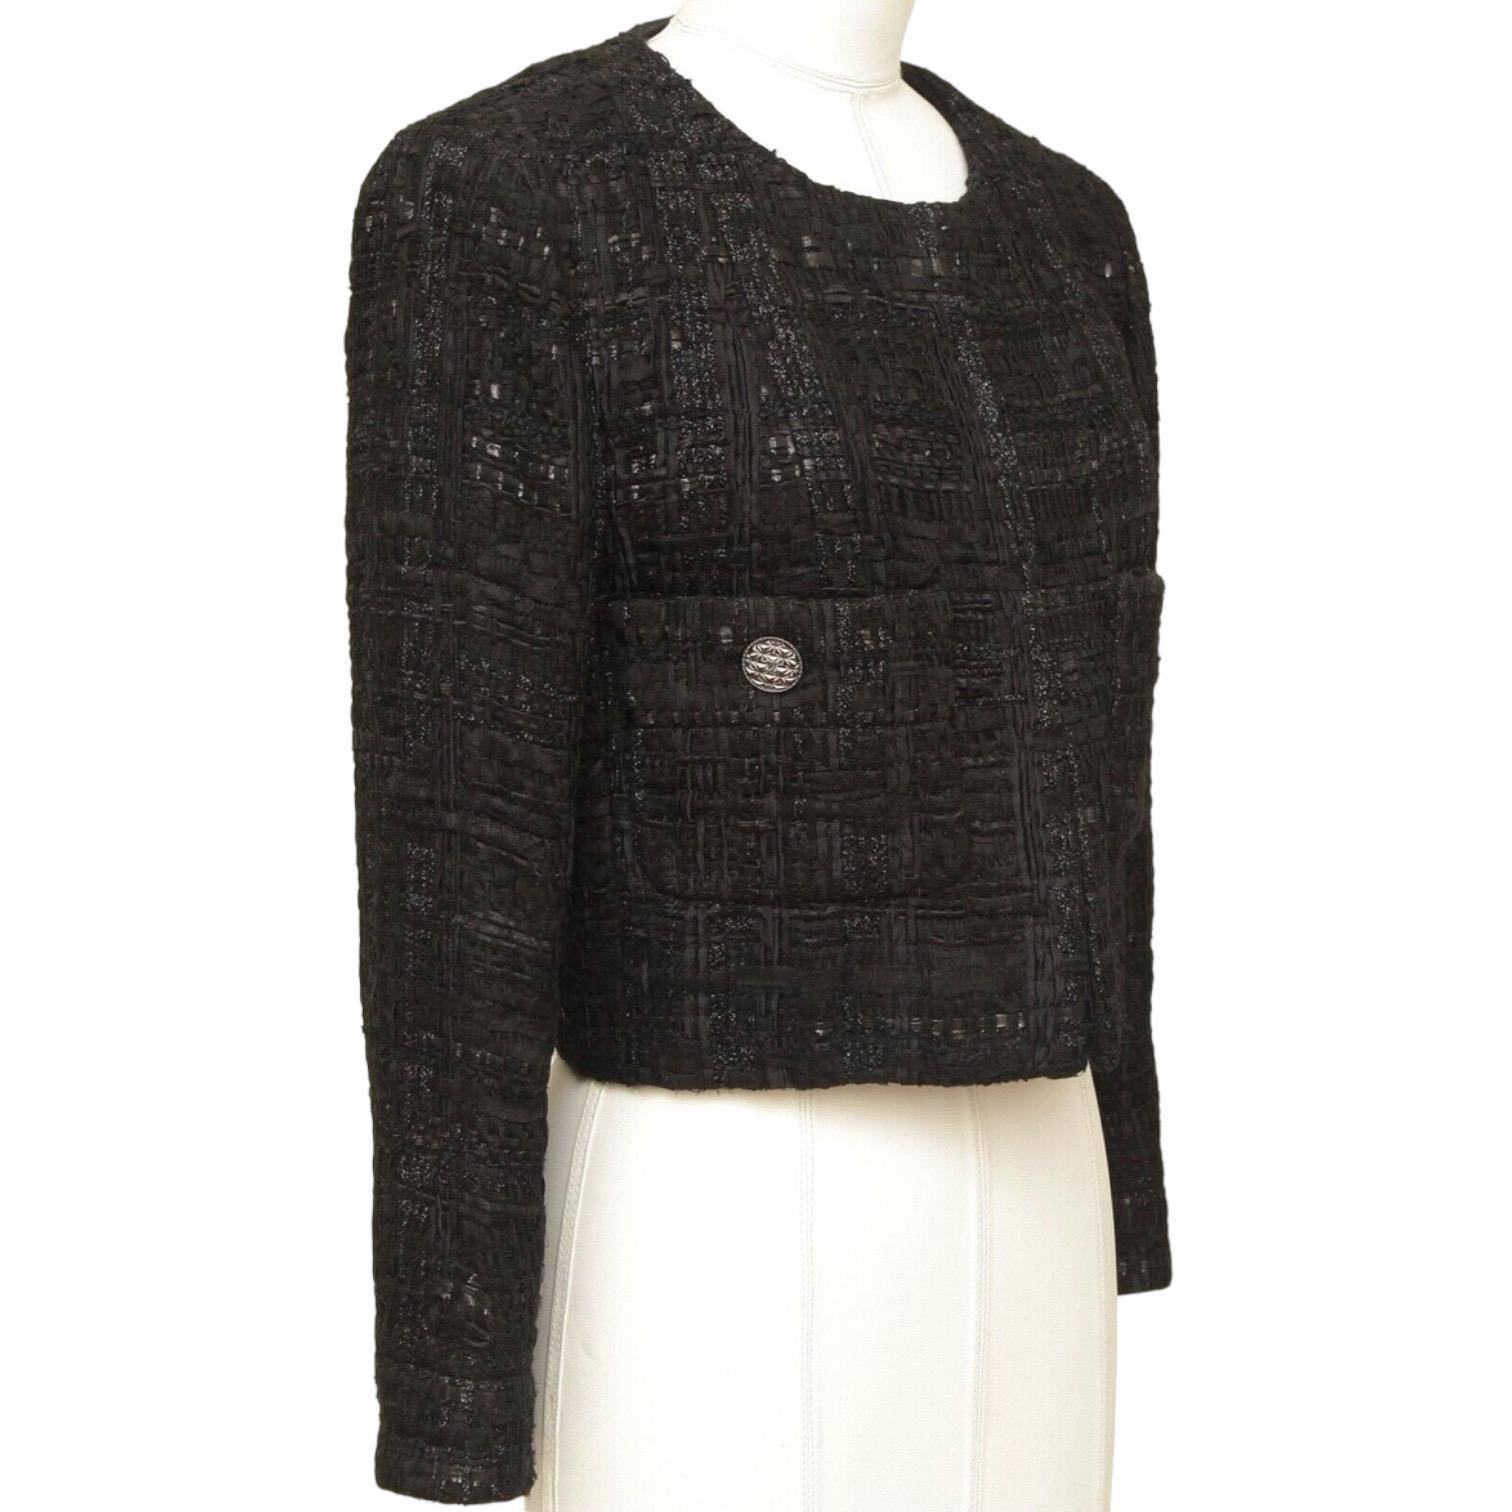 GUARANTEED AUTHENTIC CHANEL PARIS-DUBAI 2015 FANTASY TWEED BLACK JACKET

Retail excluding sales taxes $6,750.

Details:
• Signature cut and fit on this unique black open front jacket, 3 covered hook & eye closure.
• Collarless.
• Gunmetal button at